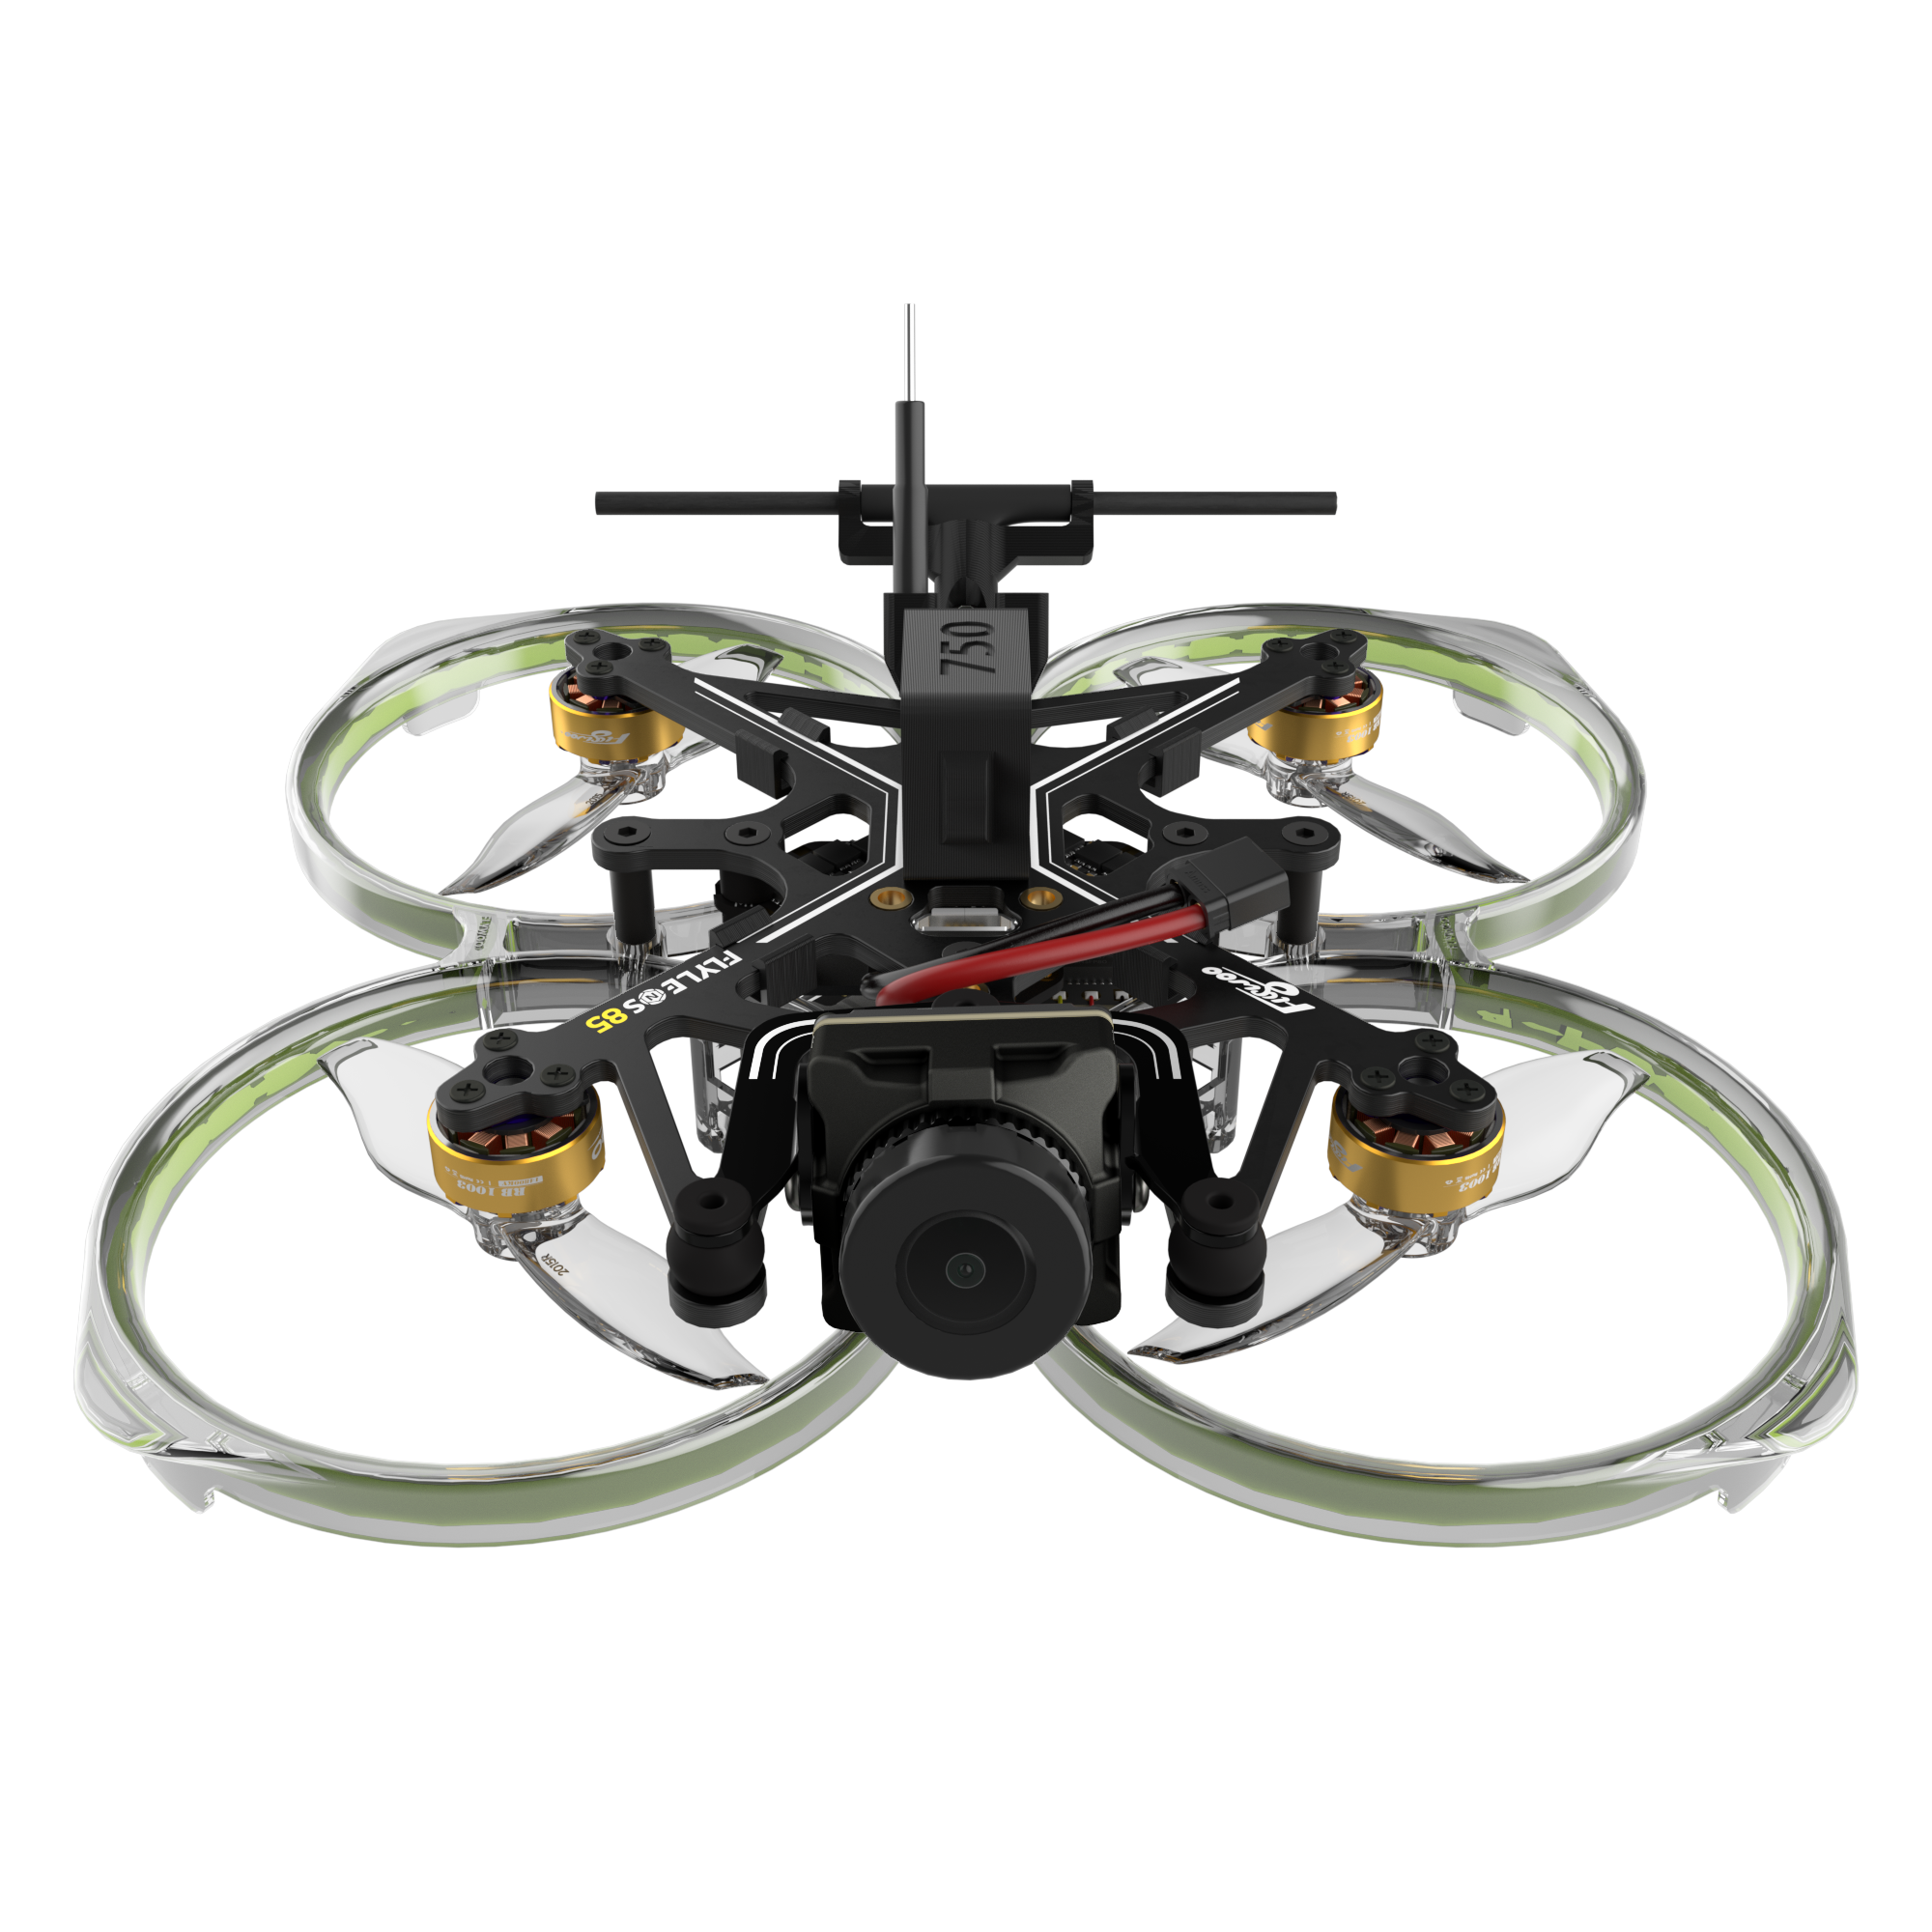 FlyLens 85 HD Wasp 2S Brushless Whoop FPV Drone V1.3